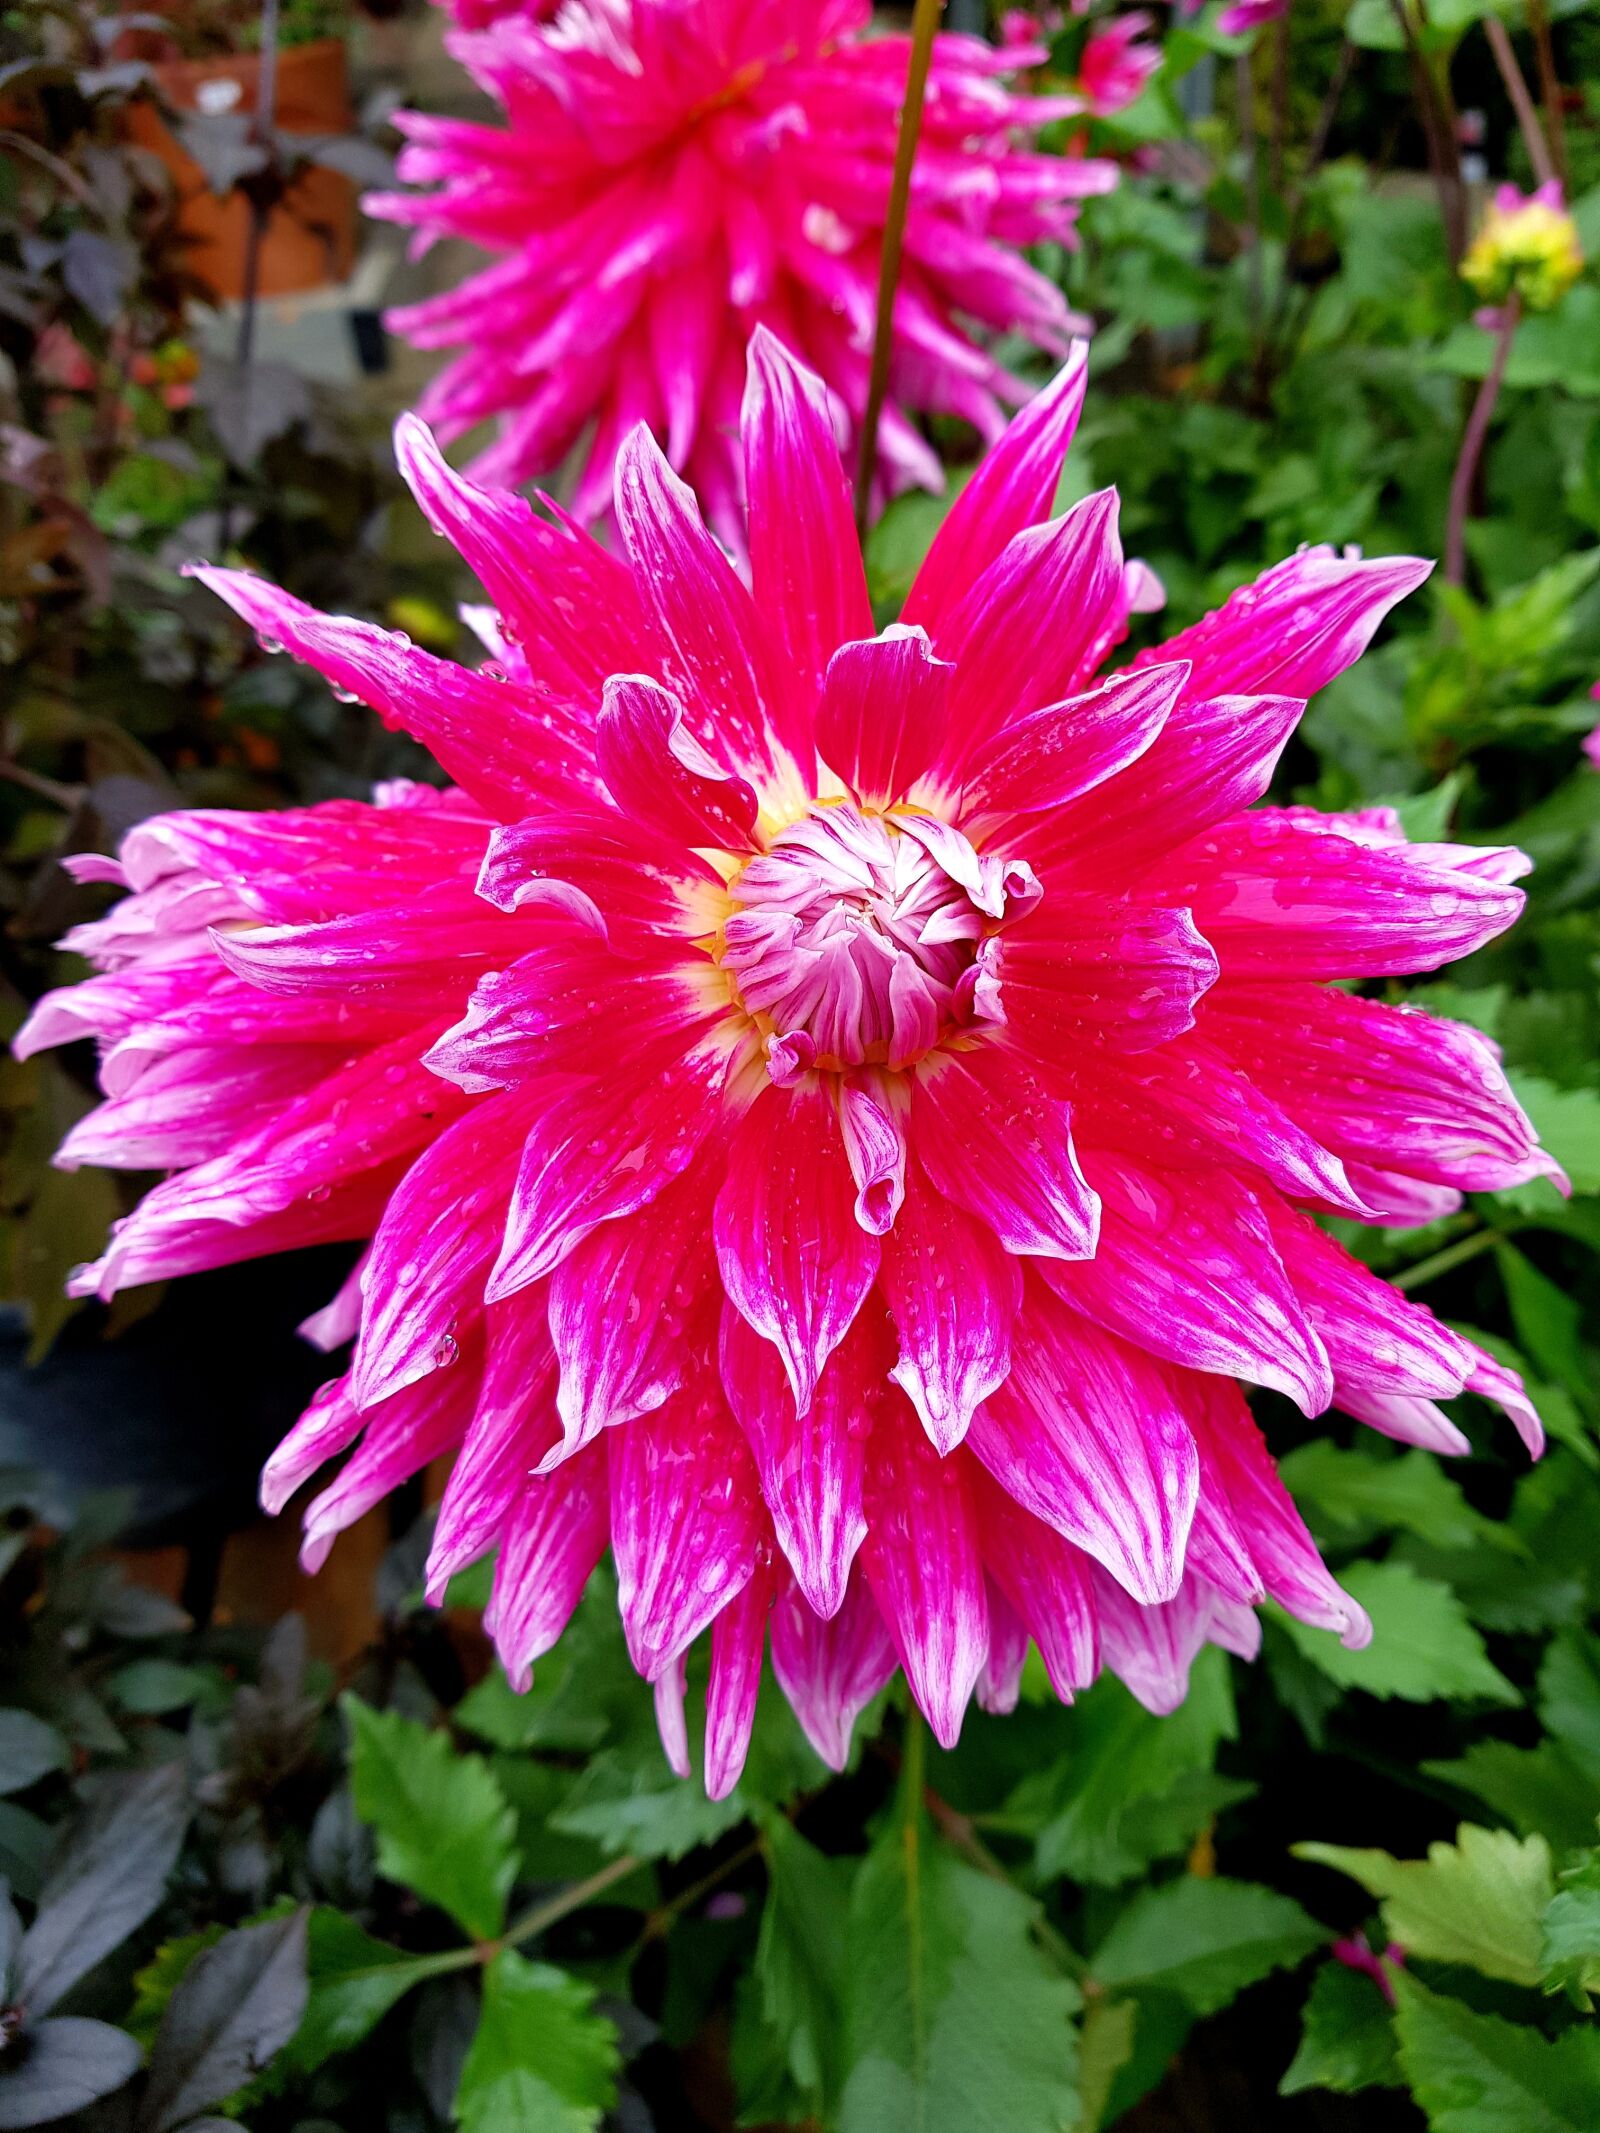 Samsung Galaxy S8 sample photo. Bright pink flower, pink photography